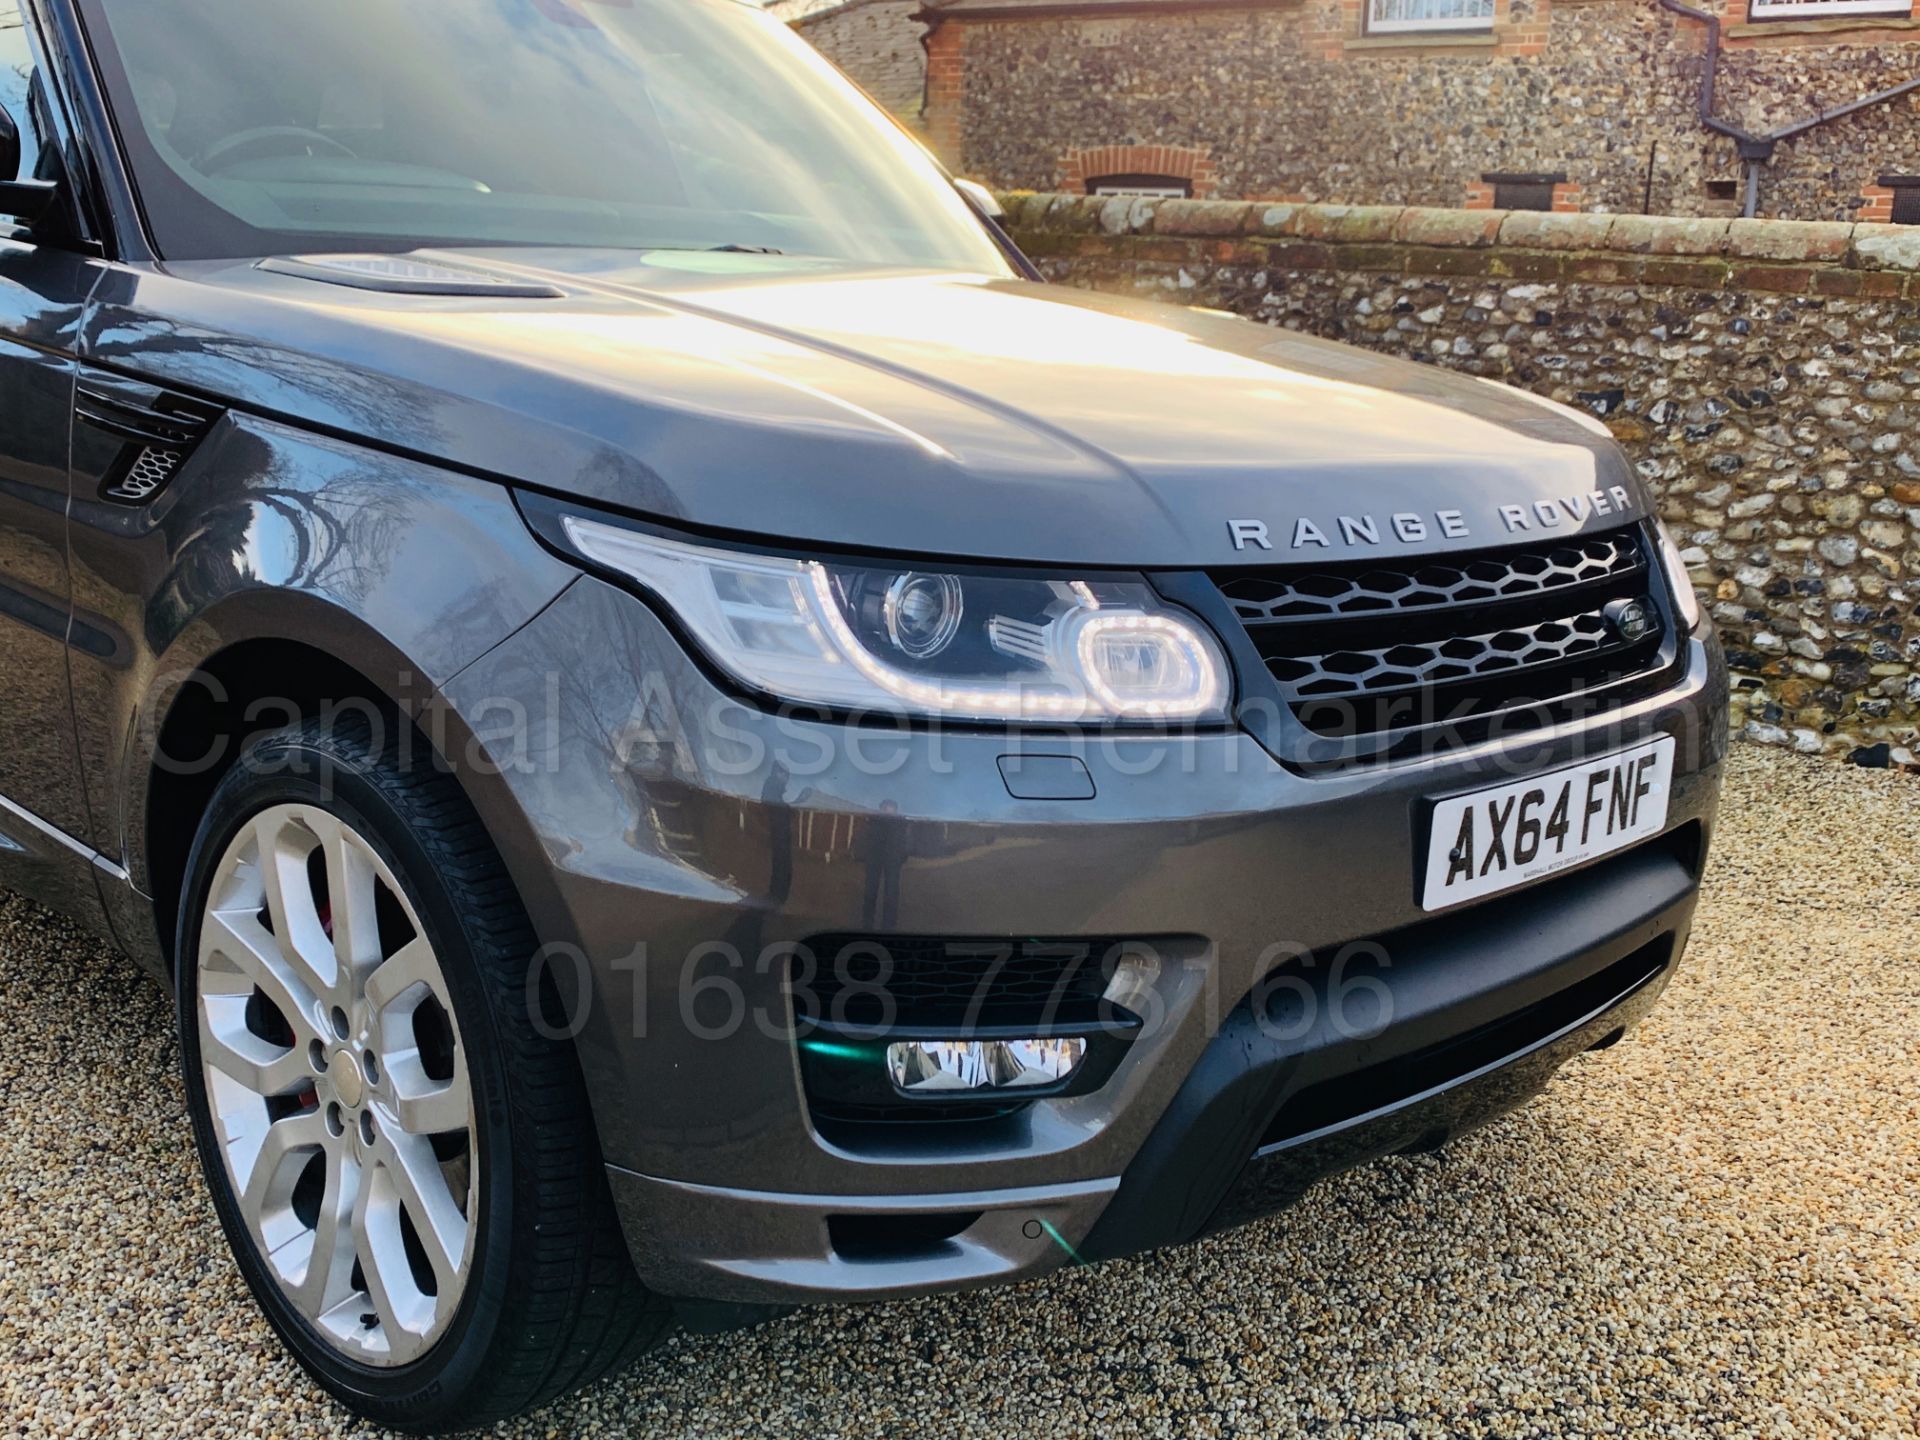 On Sale RANGE ROVER SPORT *AUTOBIOGRAPHY DYNAMIC* (2015 MODEL) '3.0 SDV6 - 8 SPEED AUTO' HIGE SPEC - Image 21 of 85